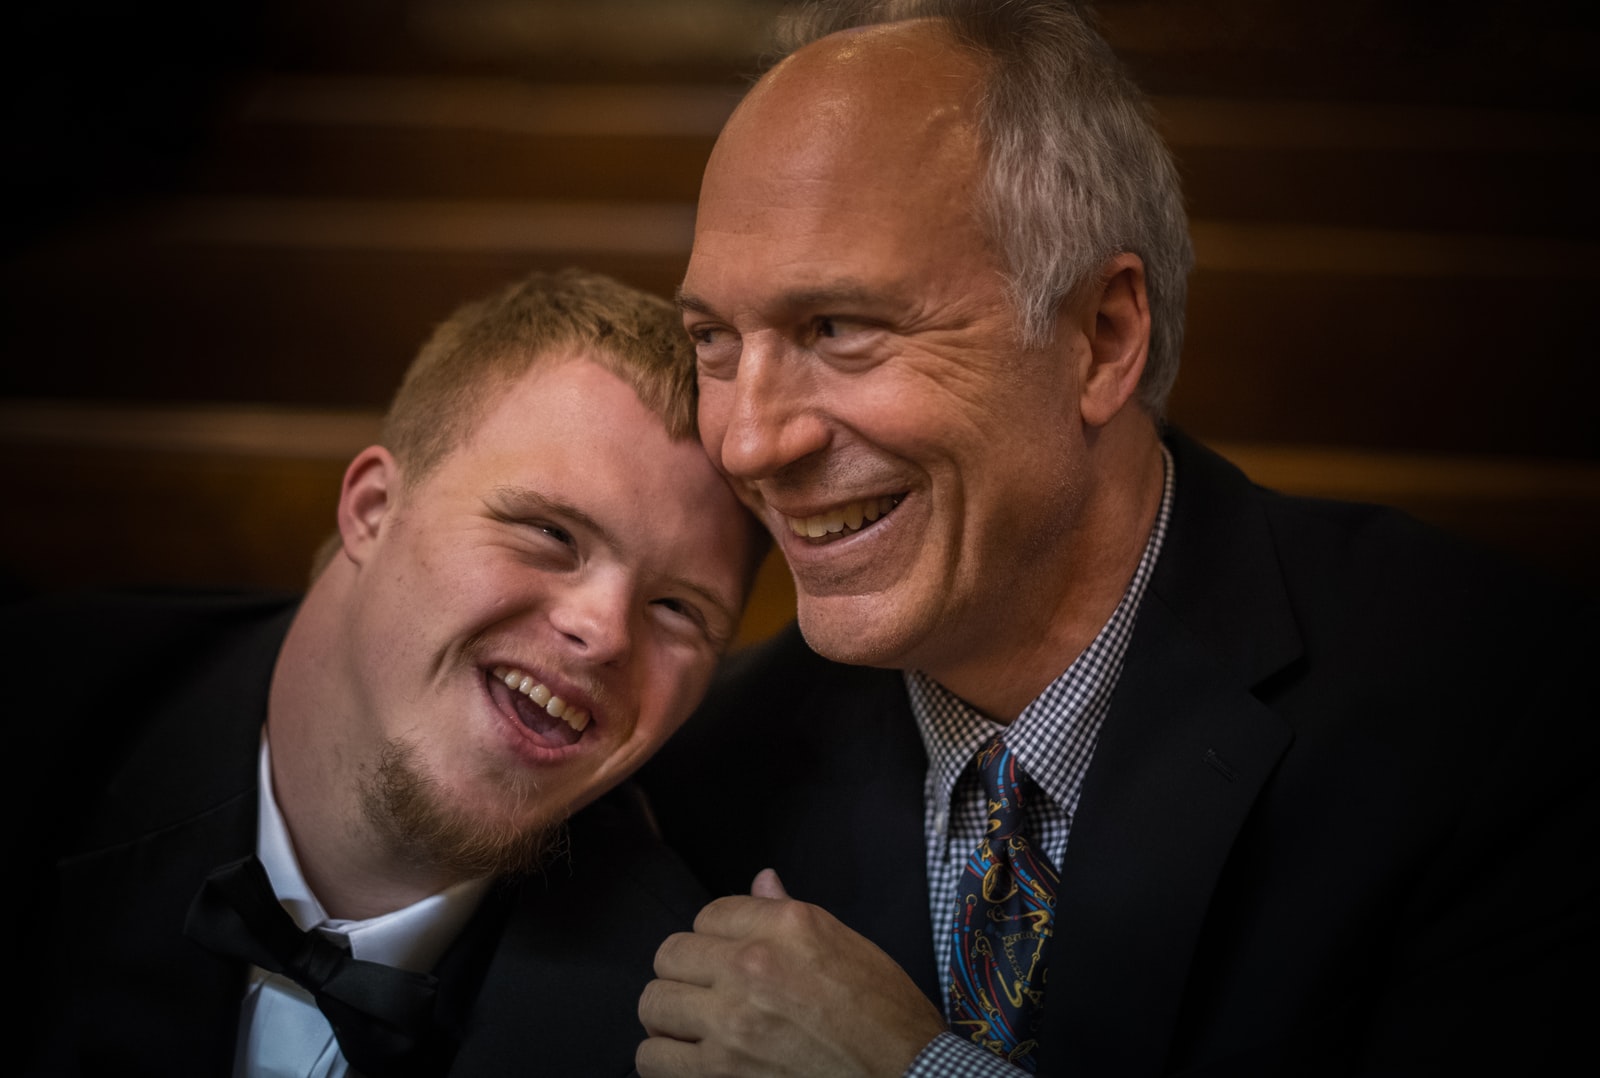 Older man smiling at younger man with down syndrome